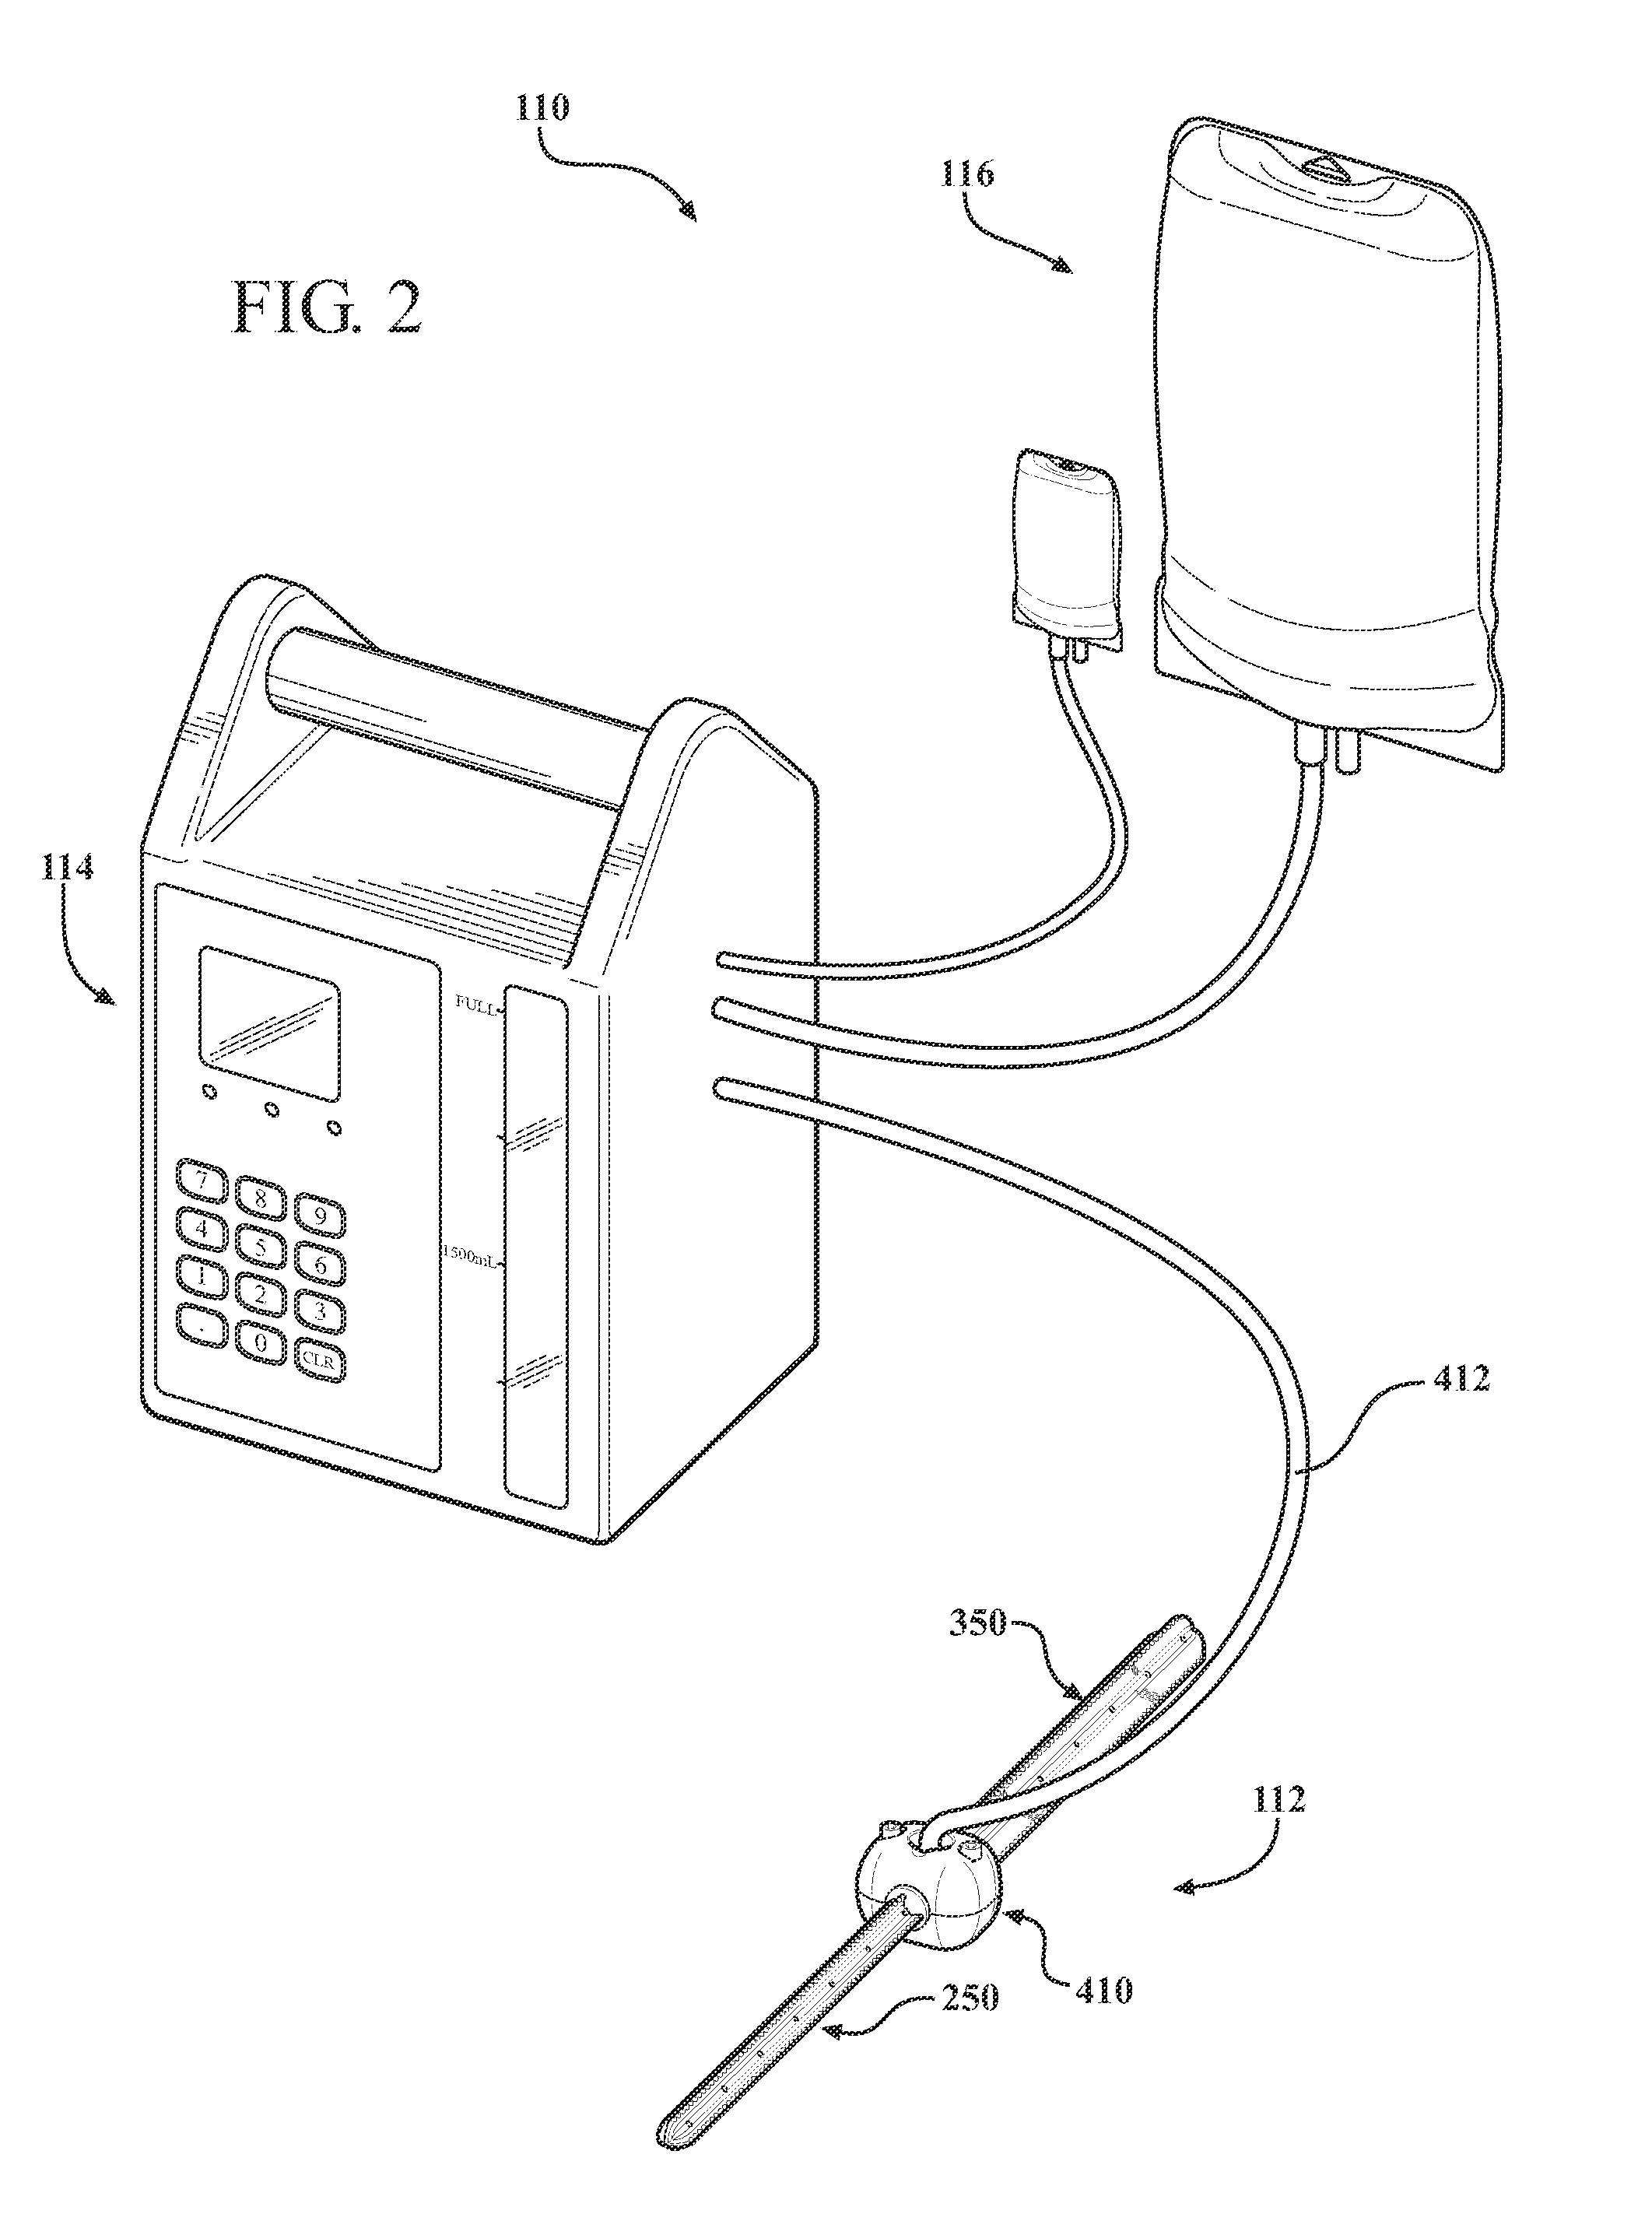 Antibiotic delivery system and method for treating an infected synovial joint during re-implantation of an orthopedic prosthesis